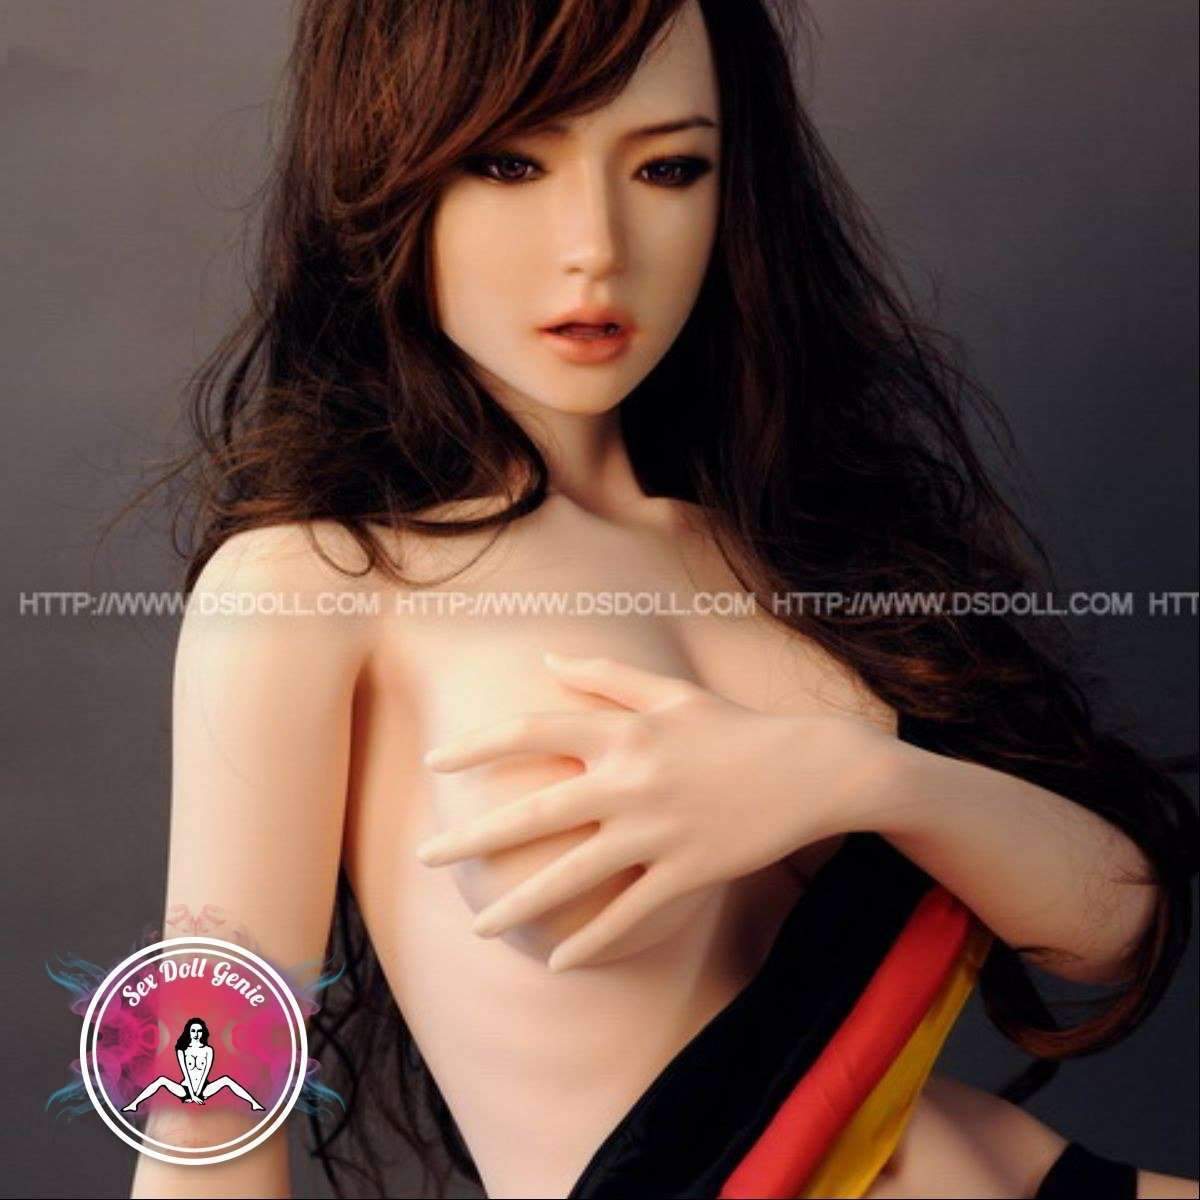 DS Doll - 160Plus - Kayla Head - Type 2 D Cup Silicone Doll-6